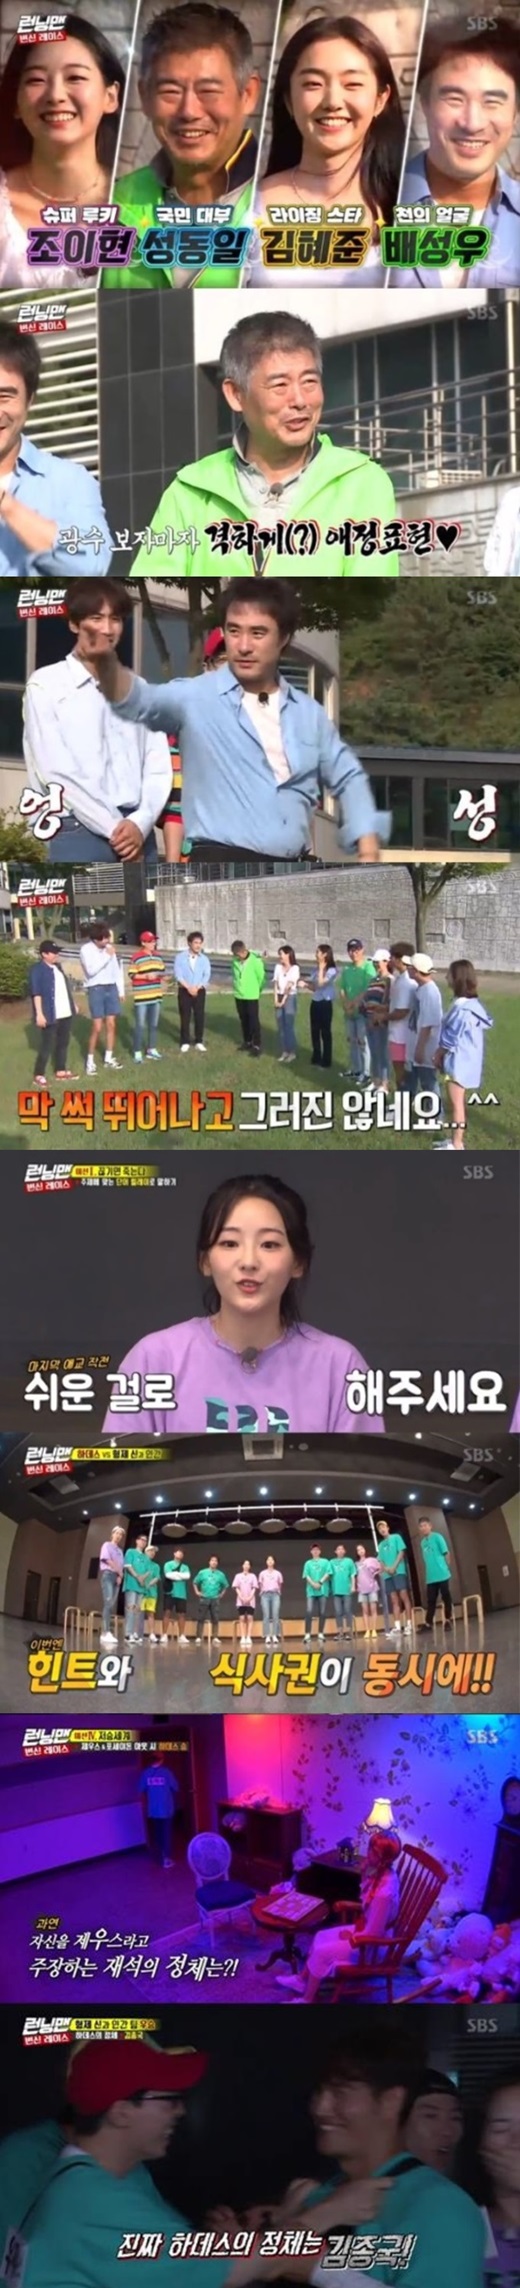 SBS Running Man took the top spot in the same time zone of 2049 target audience rating with a big gap.According to Nielsen Korea, the ratings agency, Running Man, which aired on the 11th, soared to 8.4% of the highest audience rating per minute, and the 2049 target audience rating, an important indicator of major advertising officials, recorded 3.7% (based on the second part of the audience rating of households in the metropolitan area), beating all Masked Wang and Donkey Ears.The show was accompanied by actor Sung Dong-il, Bae Seong-woo, Jo Yi-hyun and Kim Hye-joon of the movie Transform.The members challenged various missions to find Hades, Zeus, and Poseidon gods, and the chewy race that led to doubting each other until the end was exciting.Along with this, the performance of the guests also shone.Sung Dong-il, like Lee Kwang-soos natural enemy, tightened Lee Kwang-soos breath and made a penalty, while Bae Seong-woo laughed with the charm of introducing a clumsy ballet.The final mission was decorated with the horror special The Underworld Race.In order for the brothers and men to win the championship, they have to make Hades in-N-Out Burger, and if Hades makes Zeus and Poseidon in In-N-Out Burger, Hades will win alone.The members gathered hints at the appearance of ghosts in the race, and Yoo Jae-Suk and Kim Jong-kook were selected as candidates for Hades.In the meantime, Yoo Jae-Suk put Kim Jong-kooks name tag on the Hades chair that Lee Kwang-soo found, and finally Hades was revealed as Kim Jong-kook.The scene recorded the highest audience rating of 8.4% per minute, accounting for the best one minute.